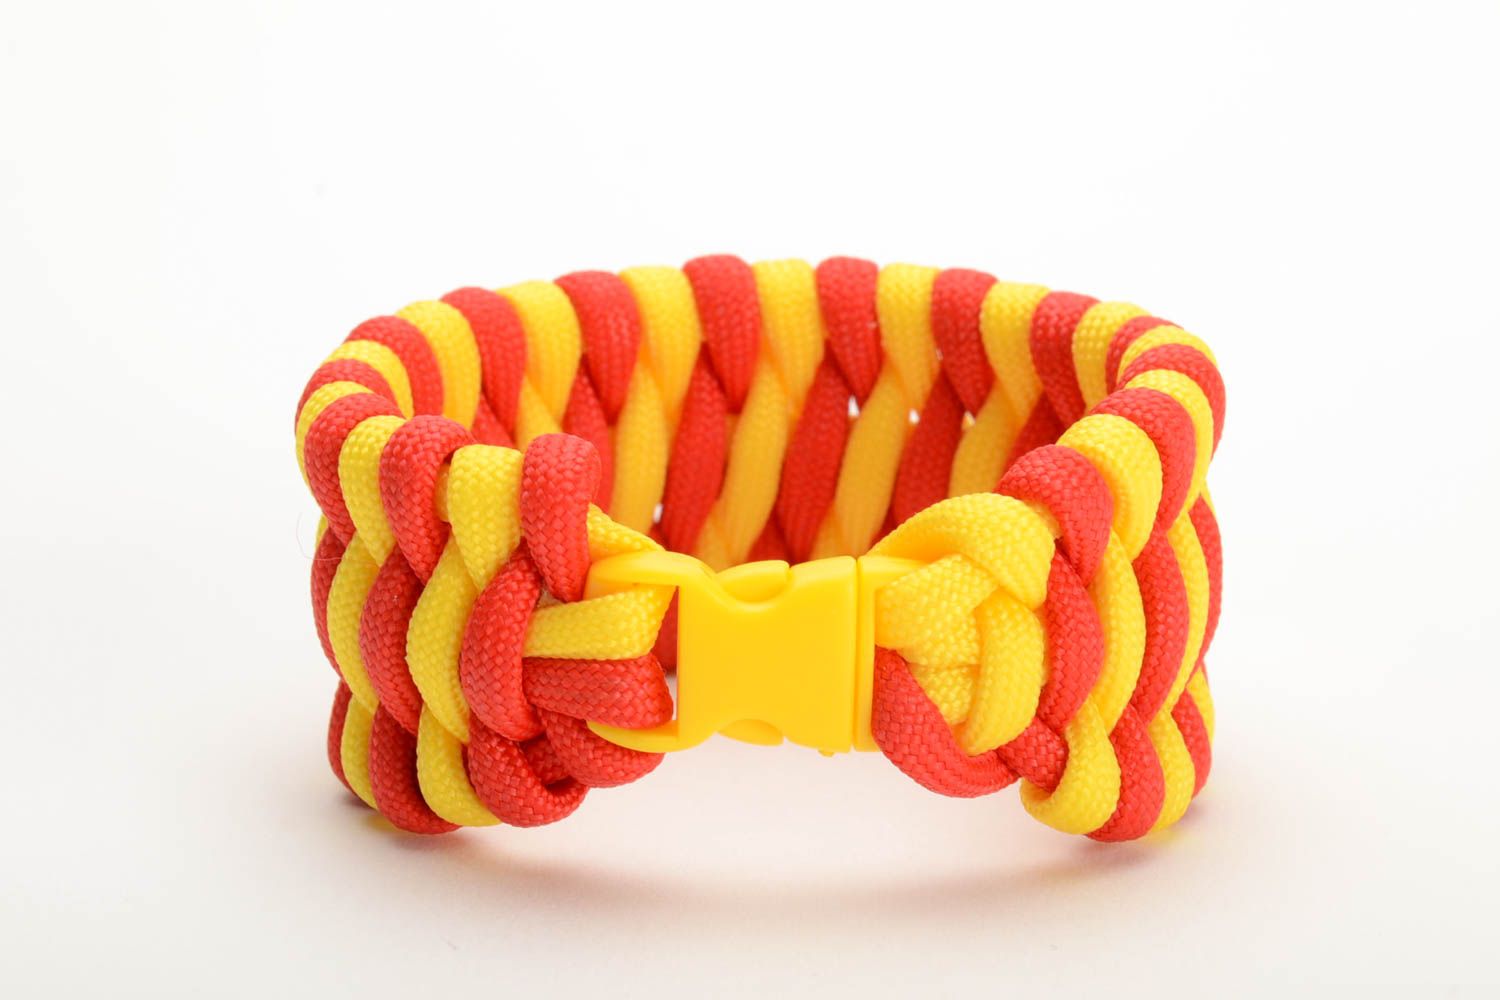 Handmade wide survival wrist bracelet woven of yellow and red paracords unisex photo 3